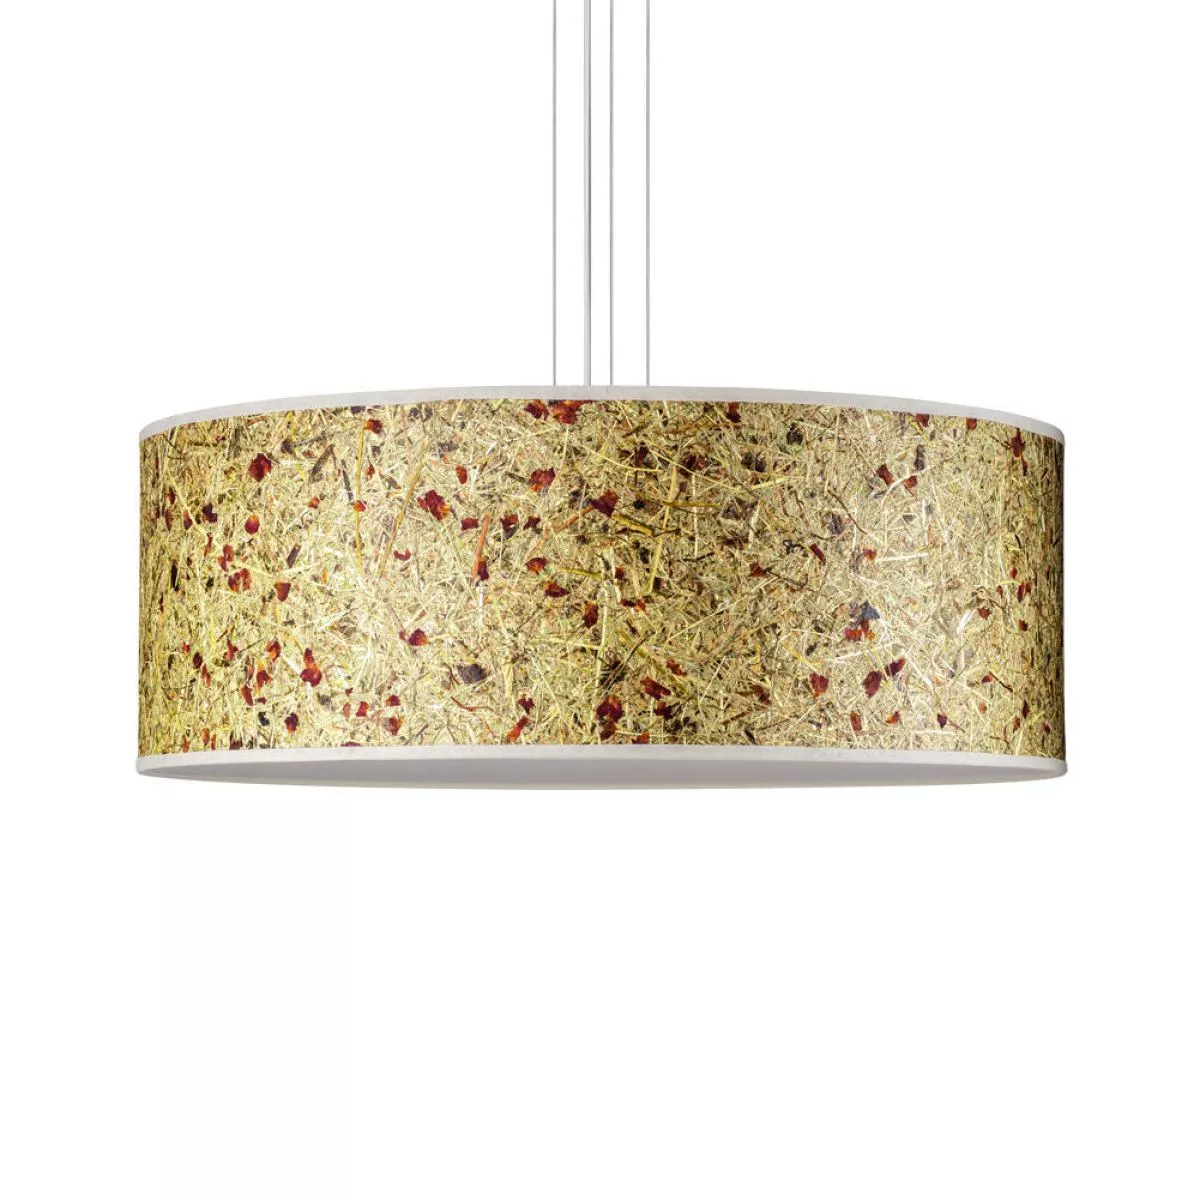 Design Pendant Lamp with Shade made of Alpine Hay and Rose Petals Ø 55 cm